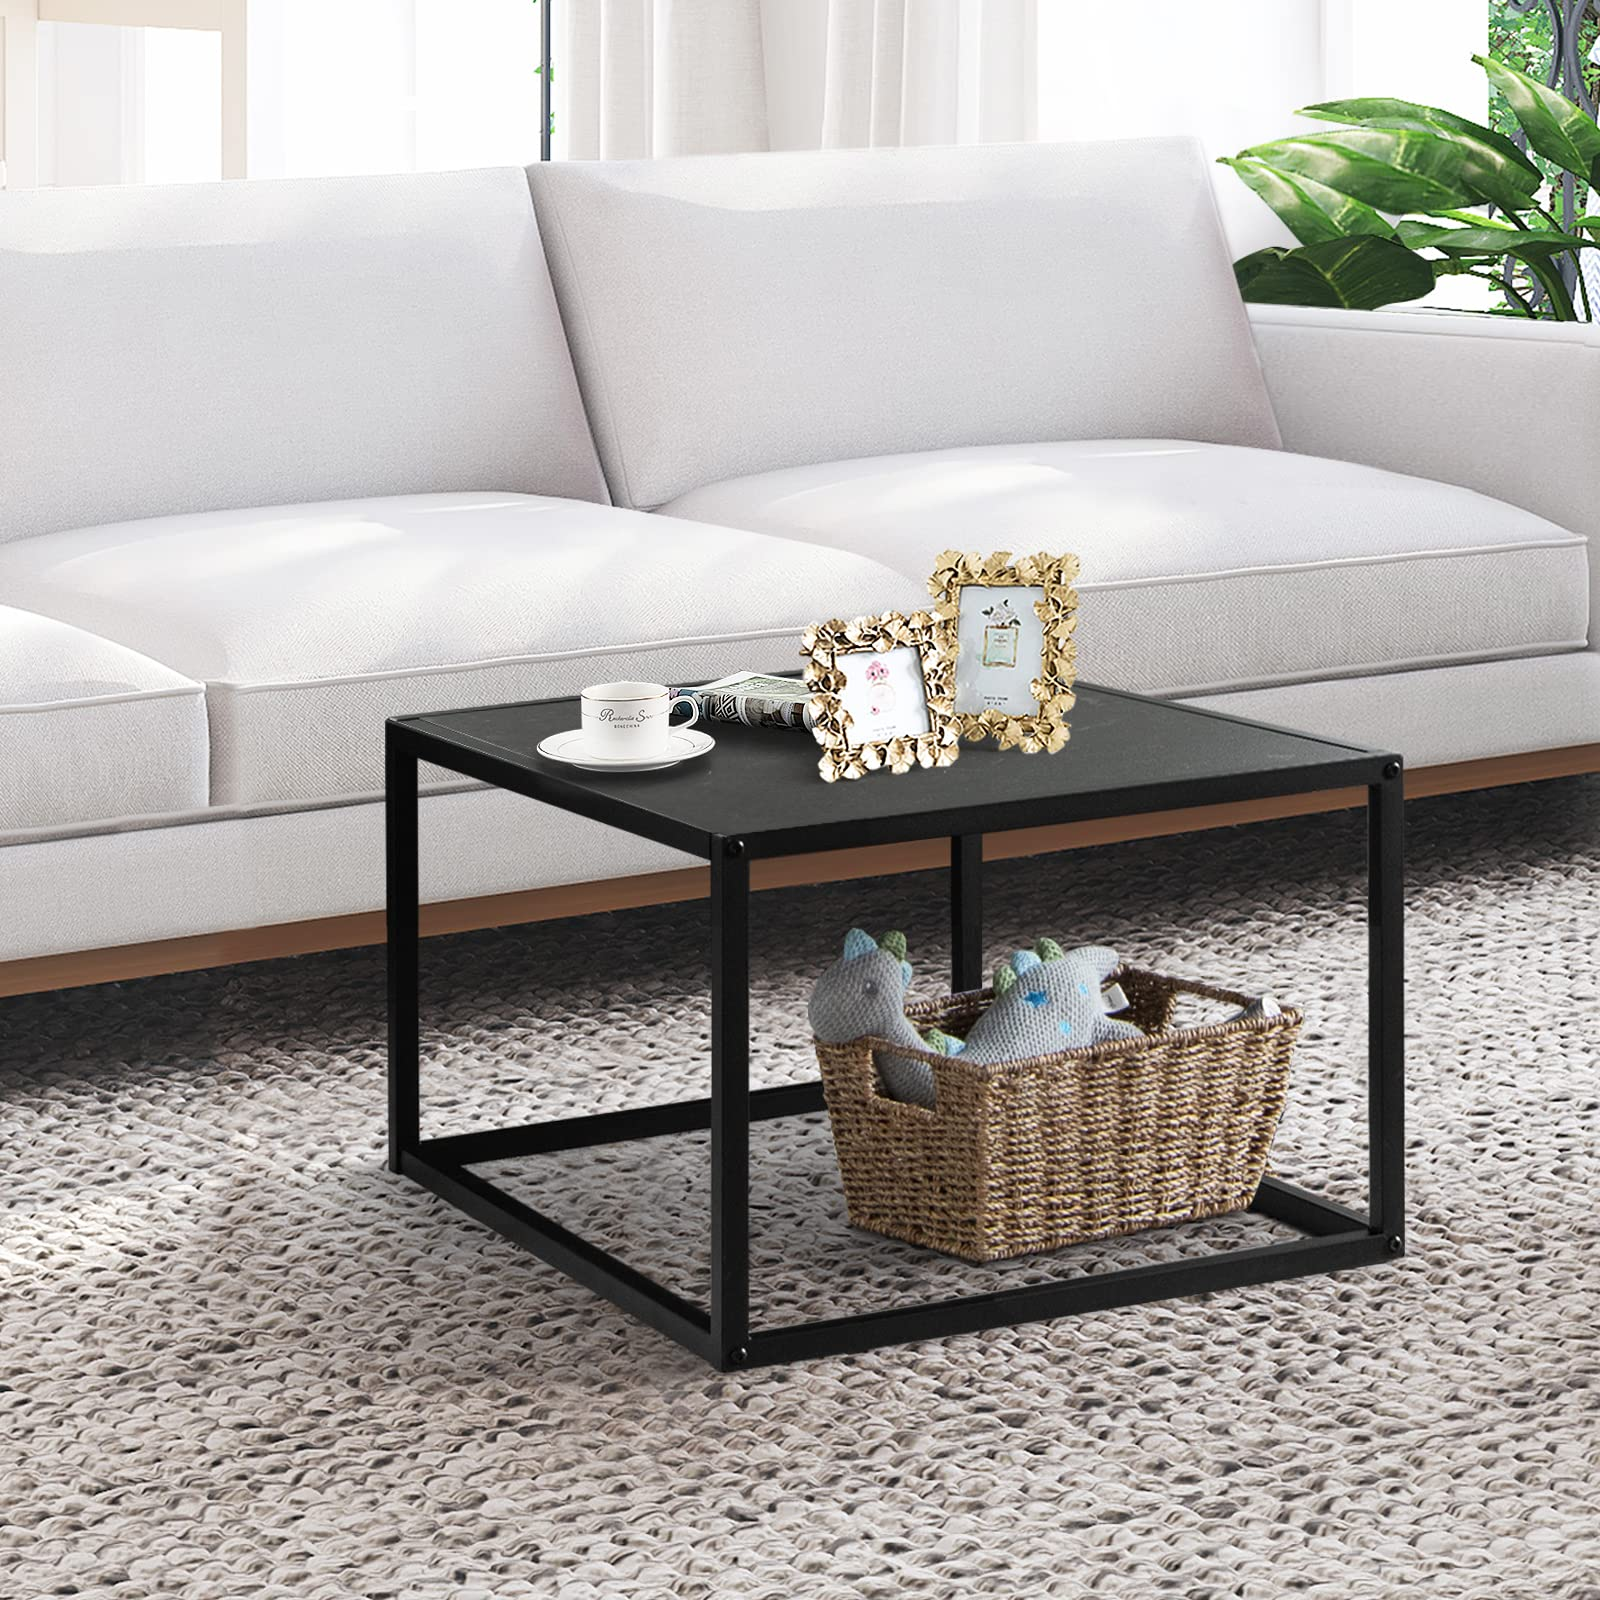 Giantex Modern Square Coffee Table with Faux Marble Tabletop & Steel Frame